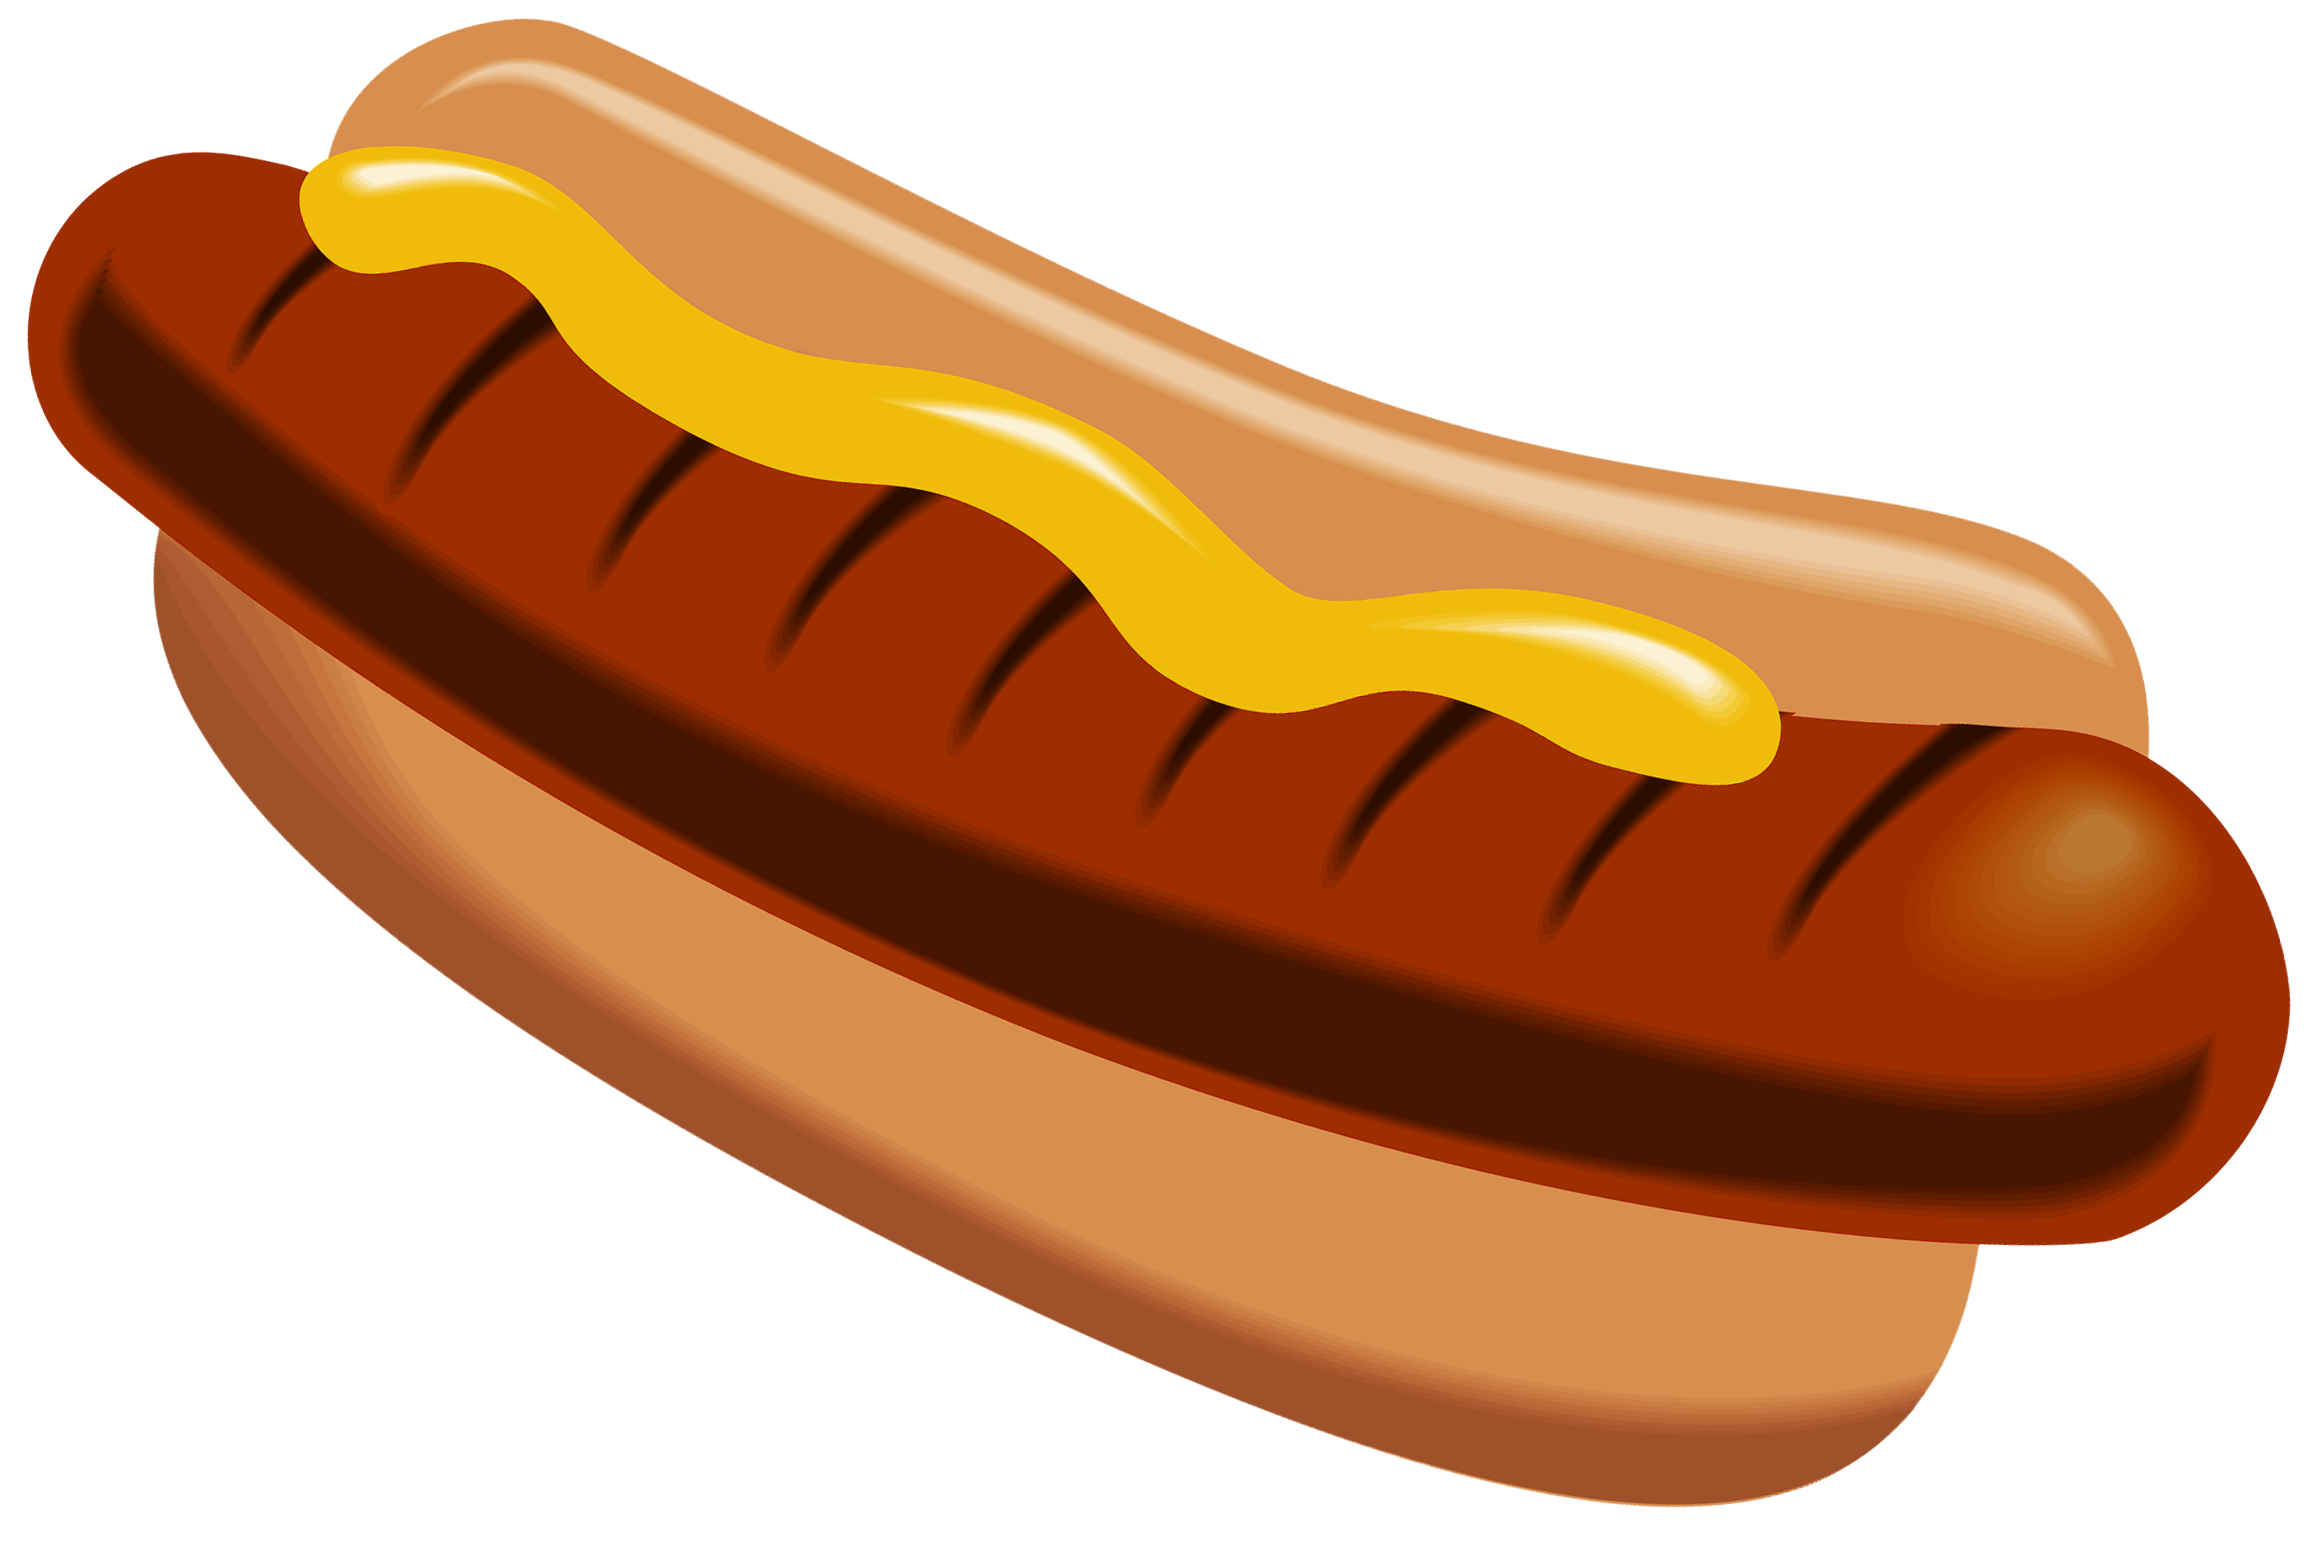 Foods clipart hot dog. With mustard png picture